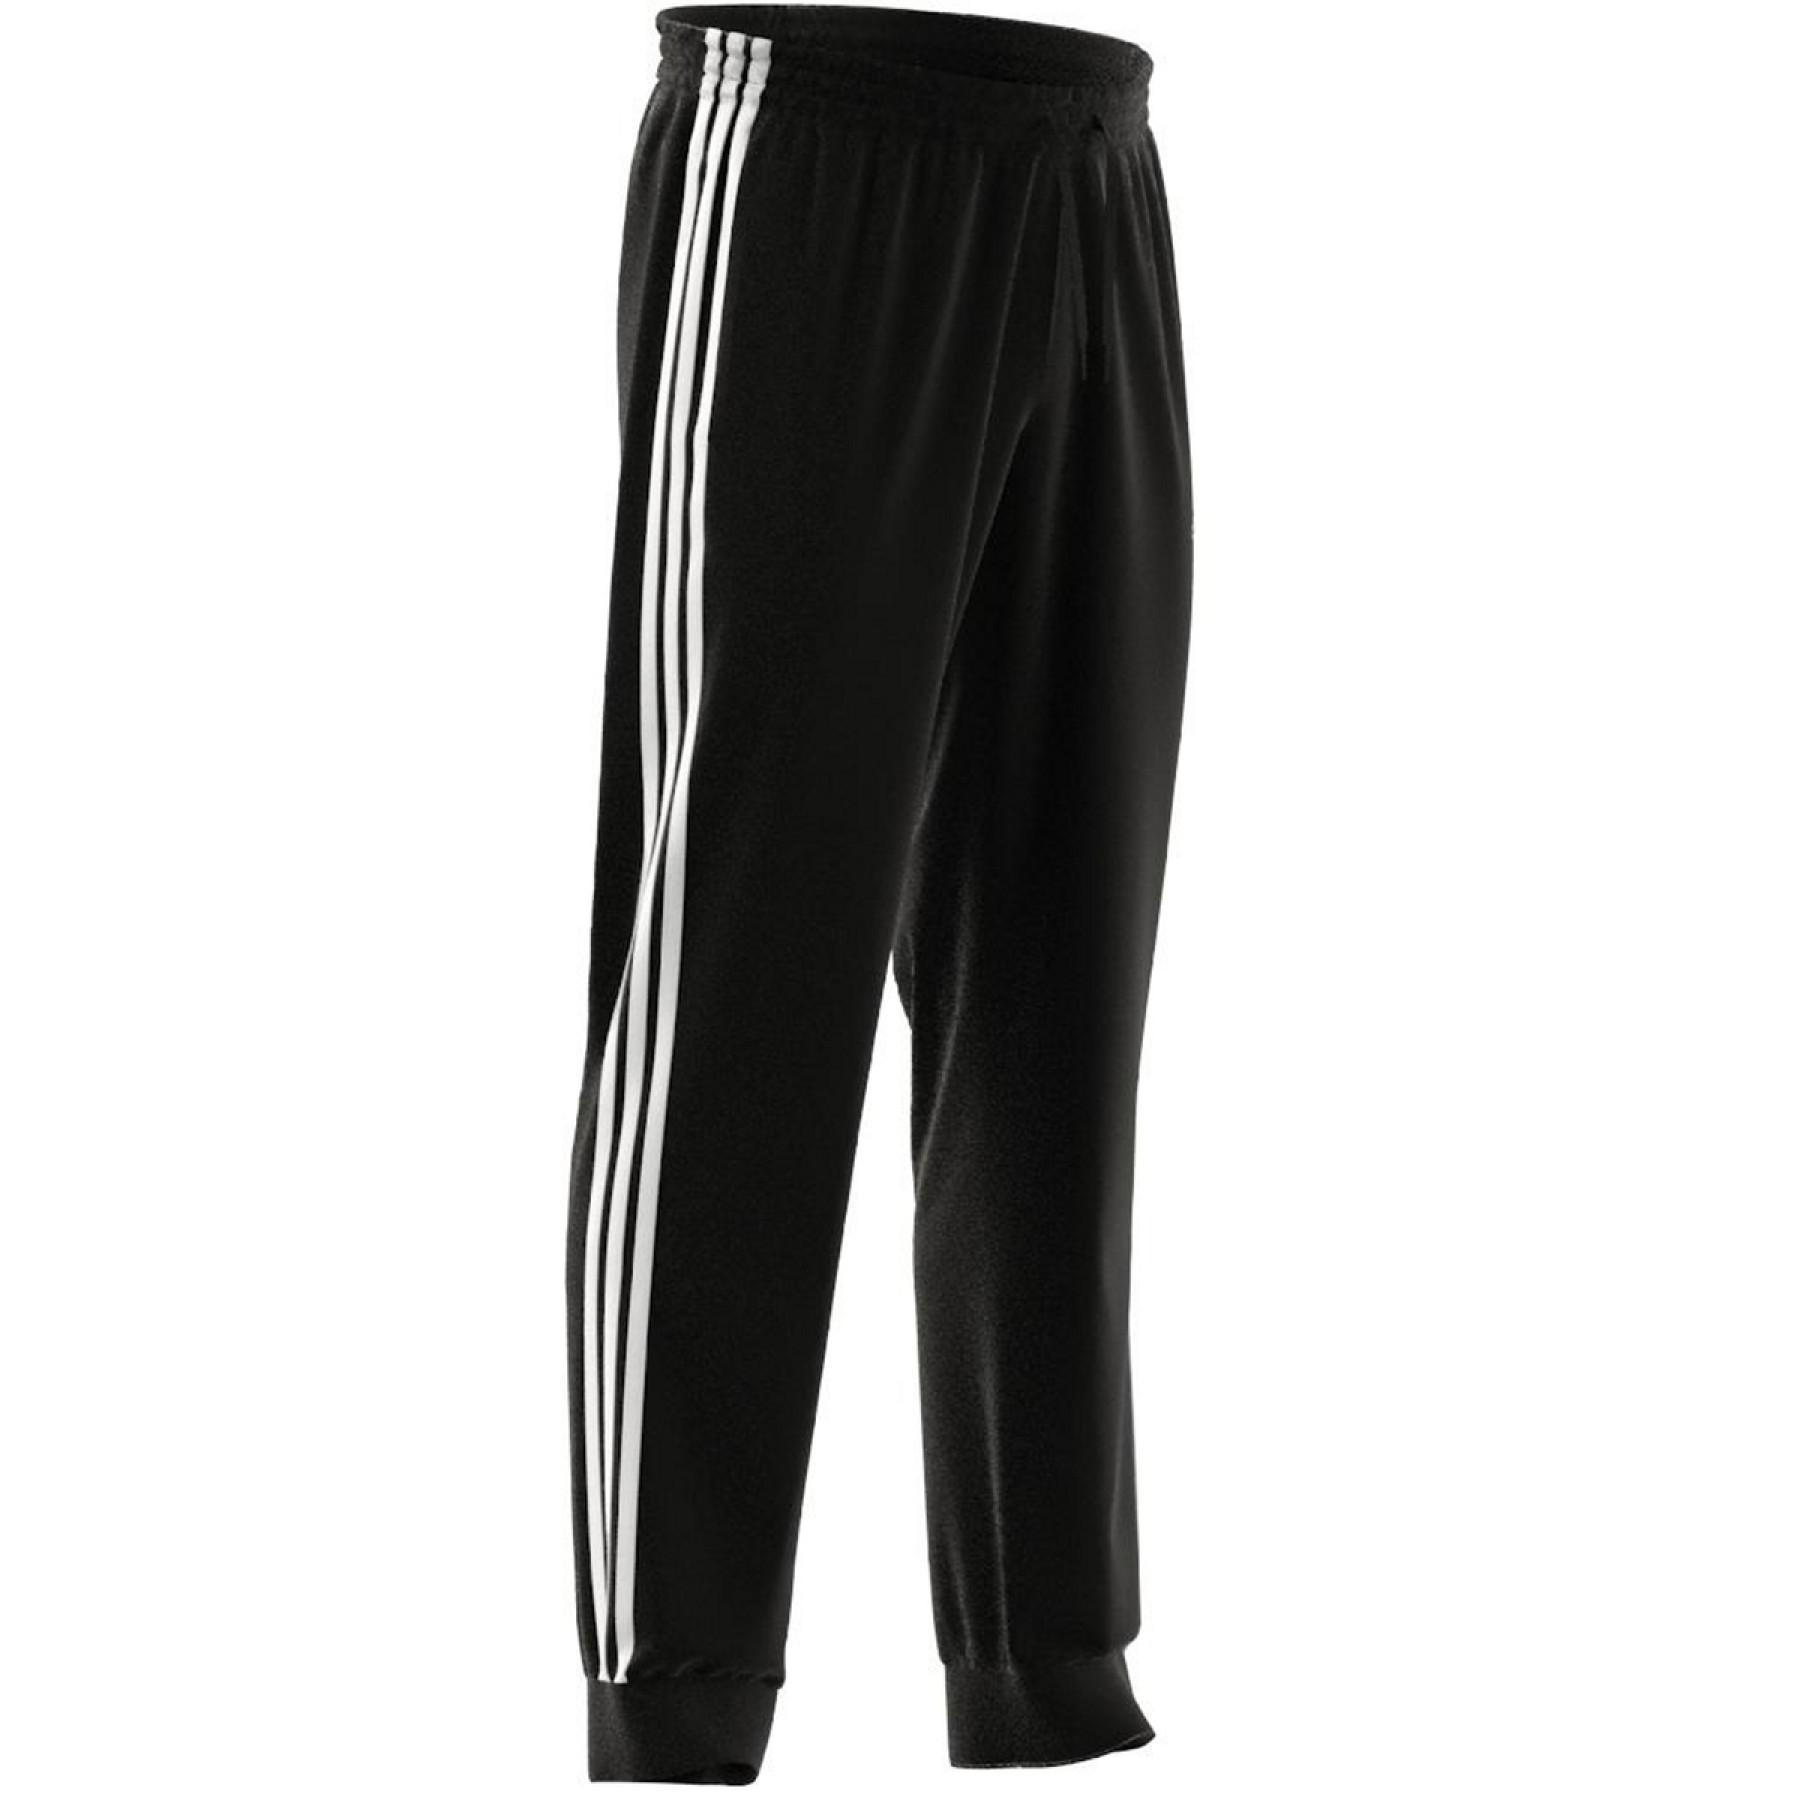 Pants adidas Aeroready Essentials Tapered Cuff Woven 3-Bandes